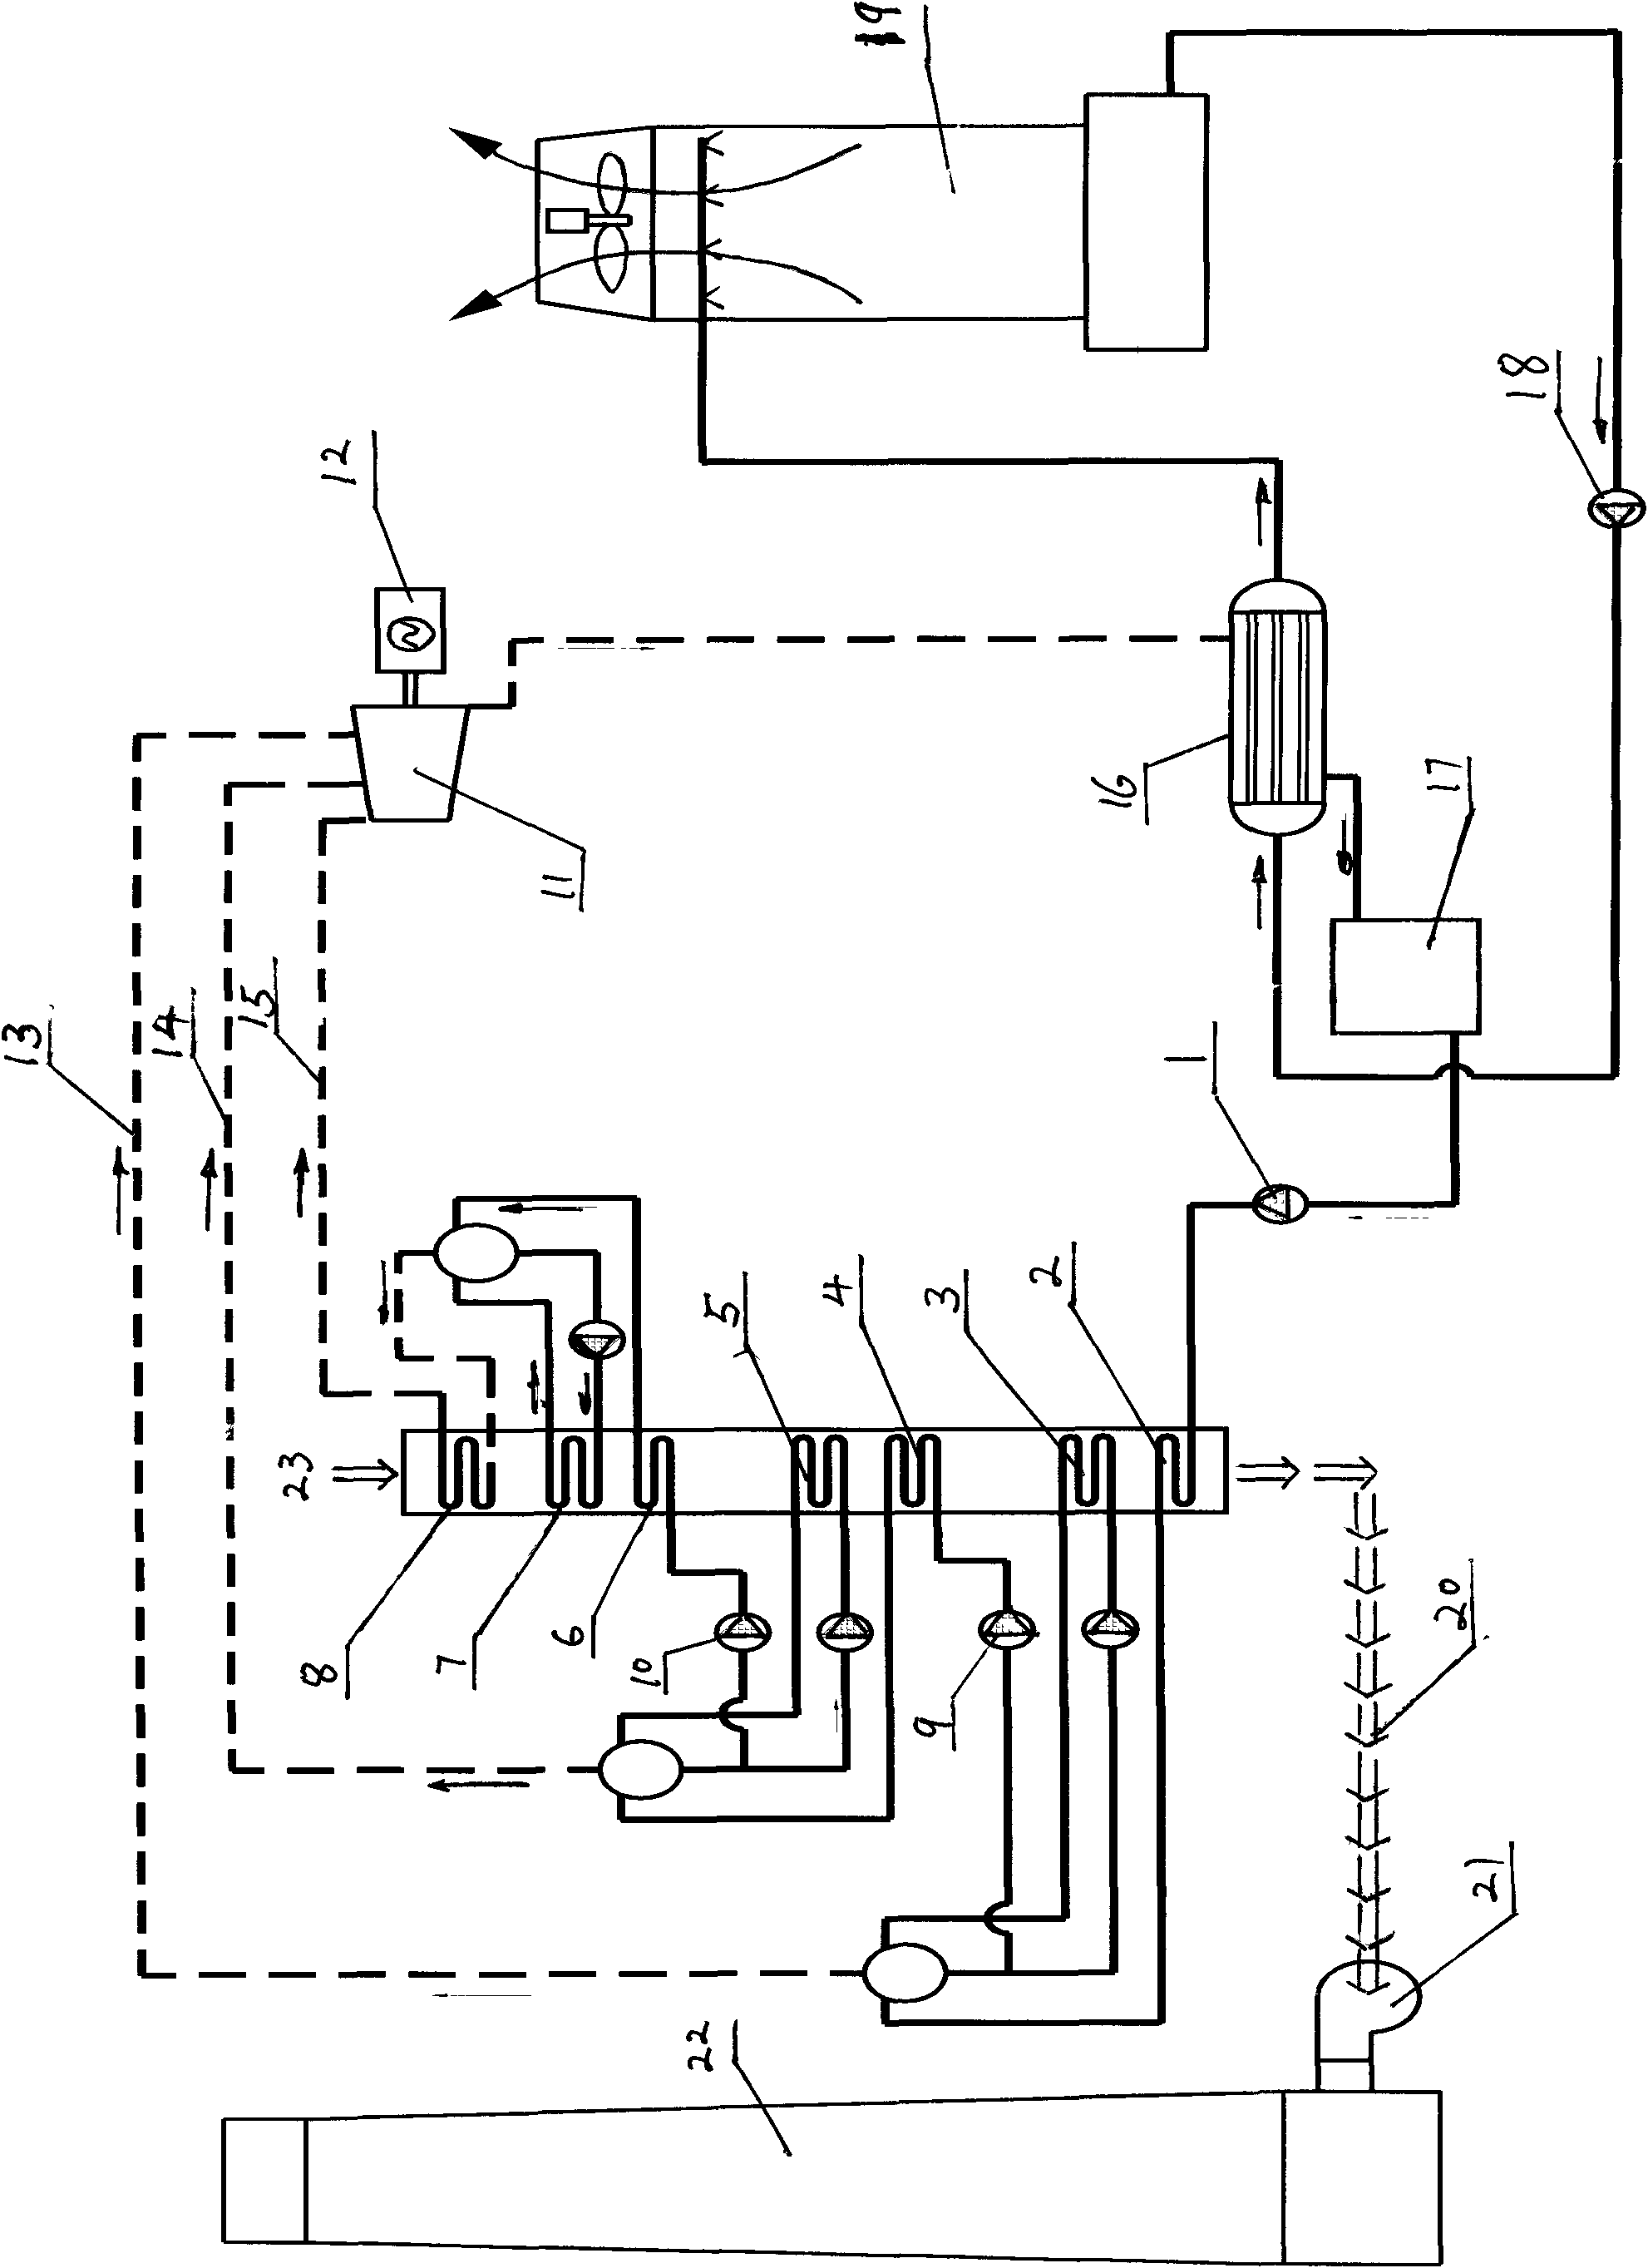 Multistage evaporation organic Rankine cycle waste heat recovery generation system and method thereof